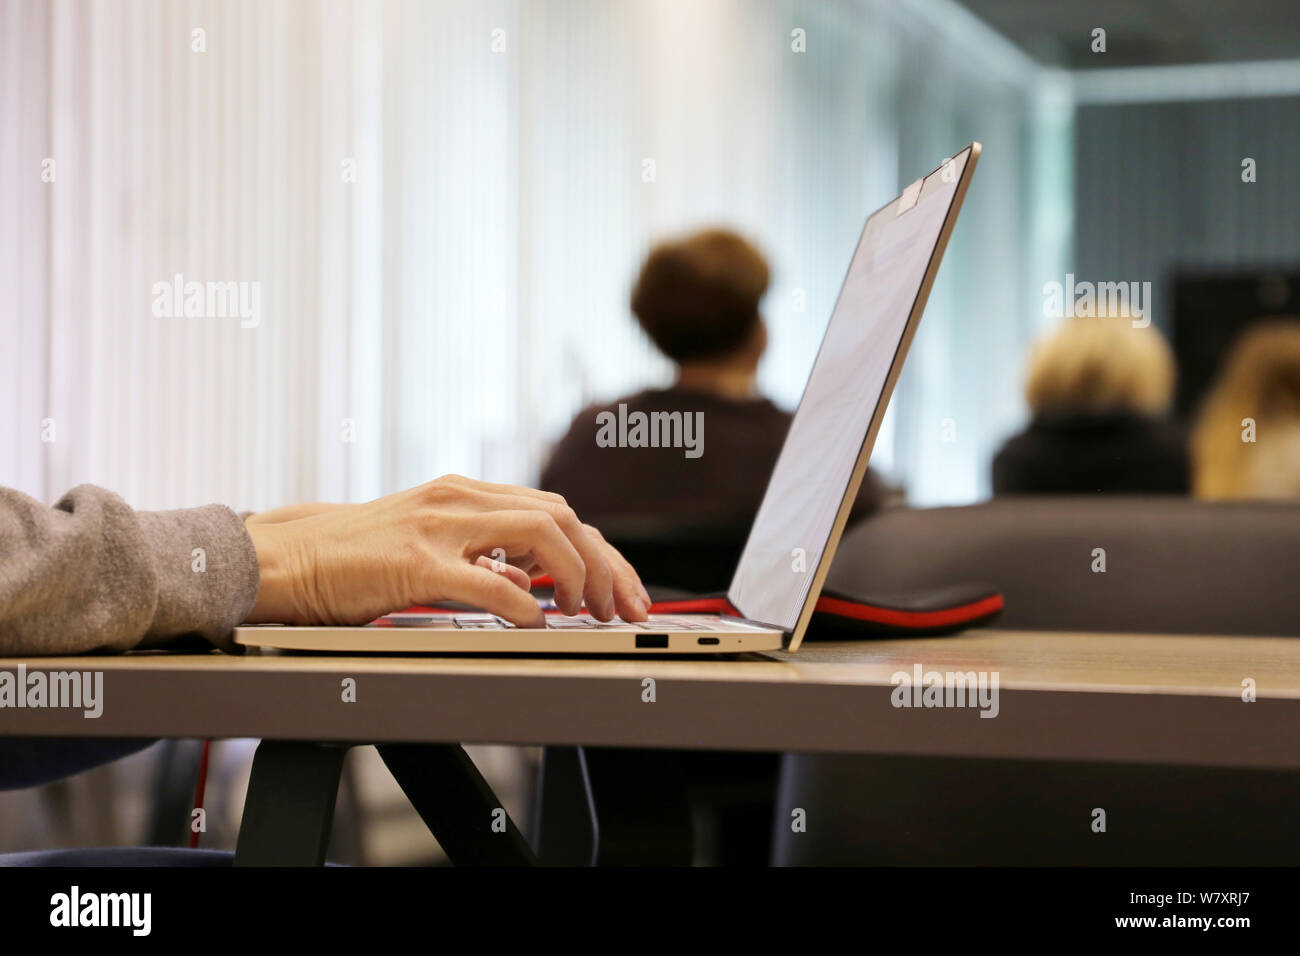 Woman using laptop in office, female hands on a keyboard. Girl sitting with a notebook with closed camera at a table on people background Stock Photo